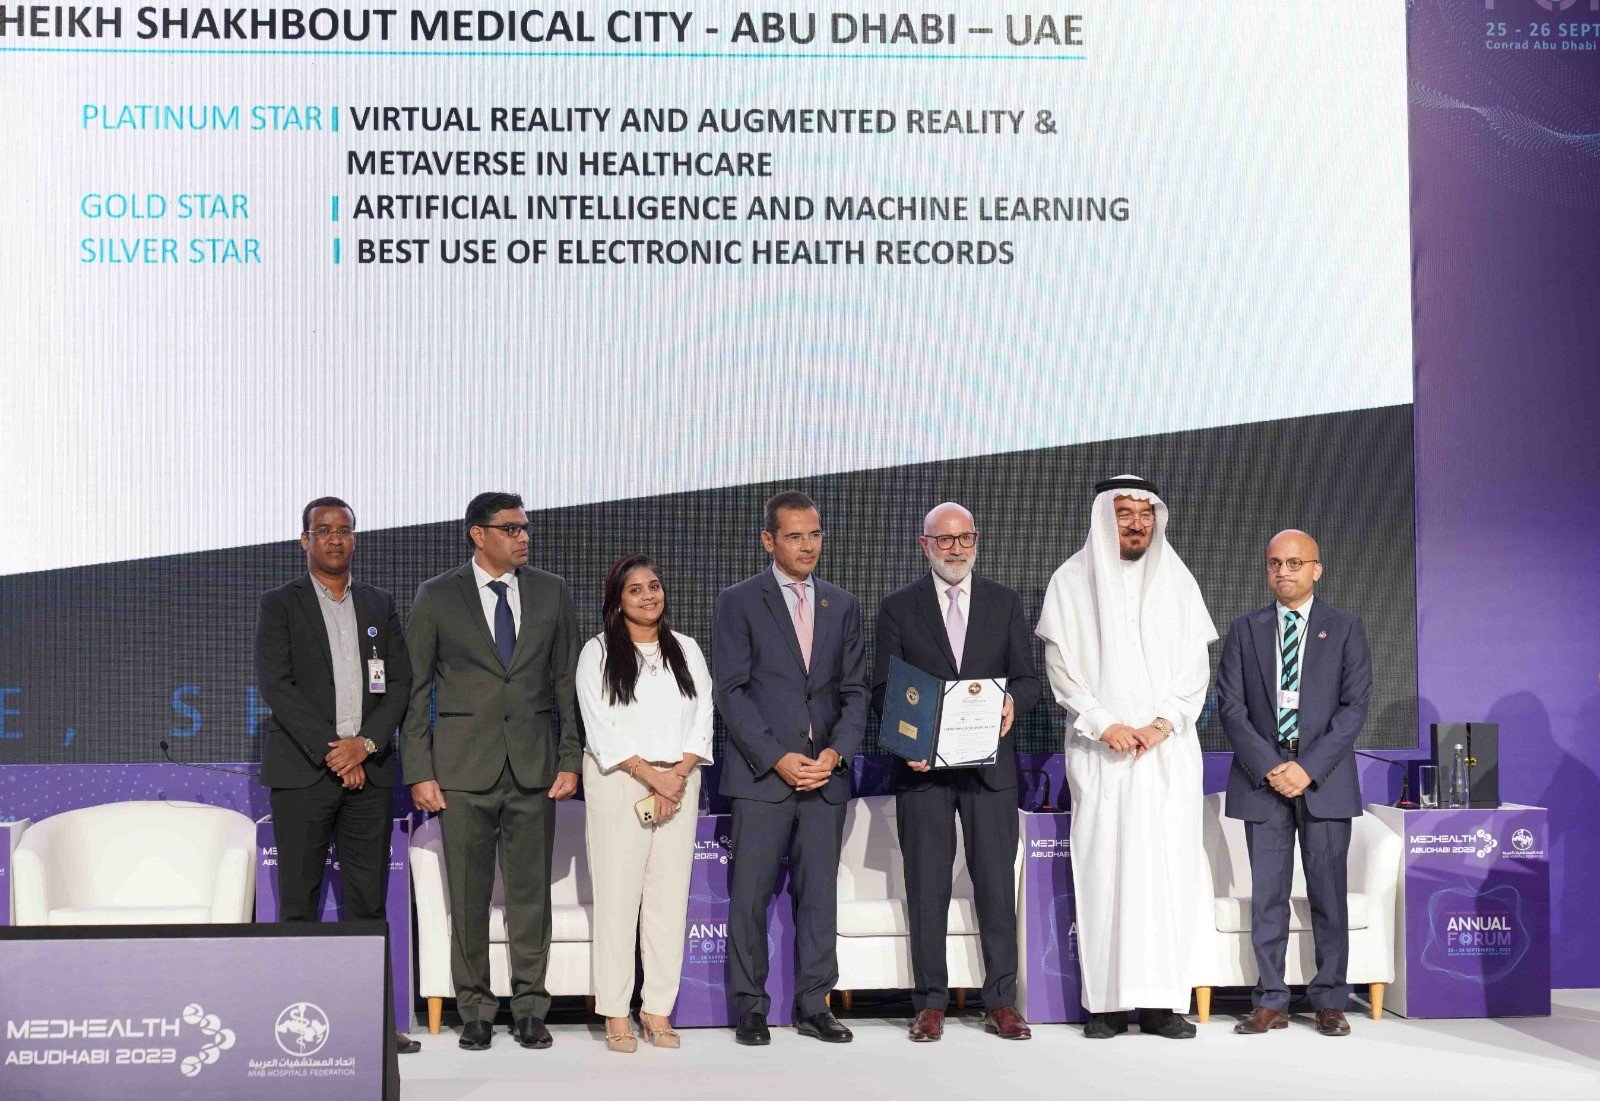 Sheikh Shakhbout Medical City Receives Prestigious Gold Initiative Certificate for Innovation in Health Care